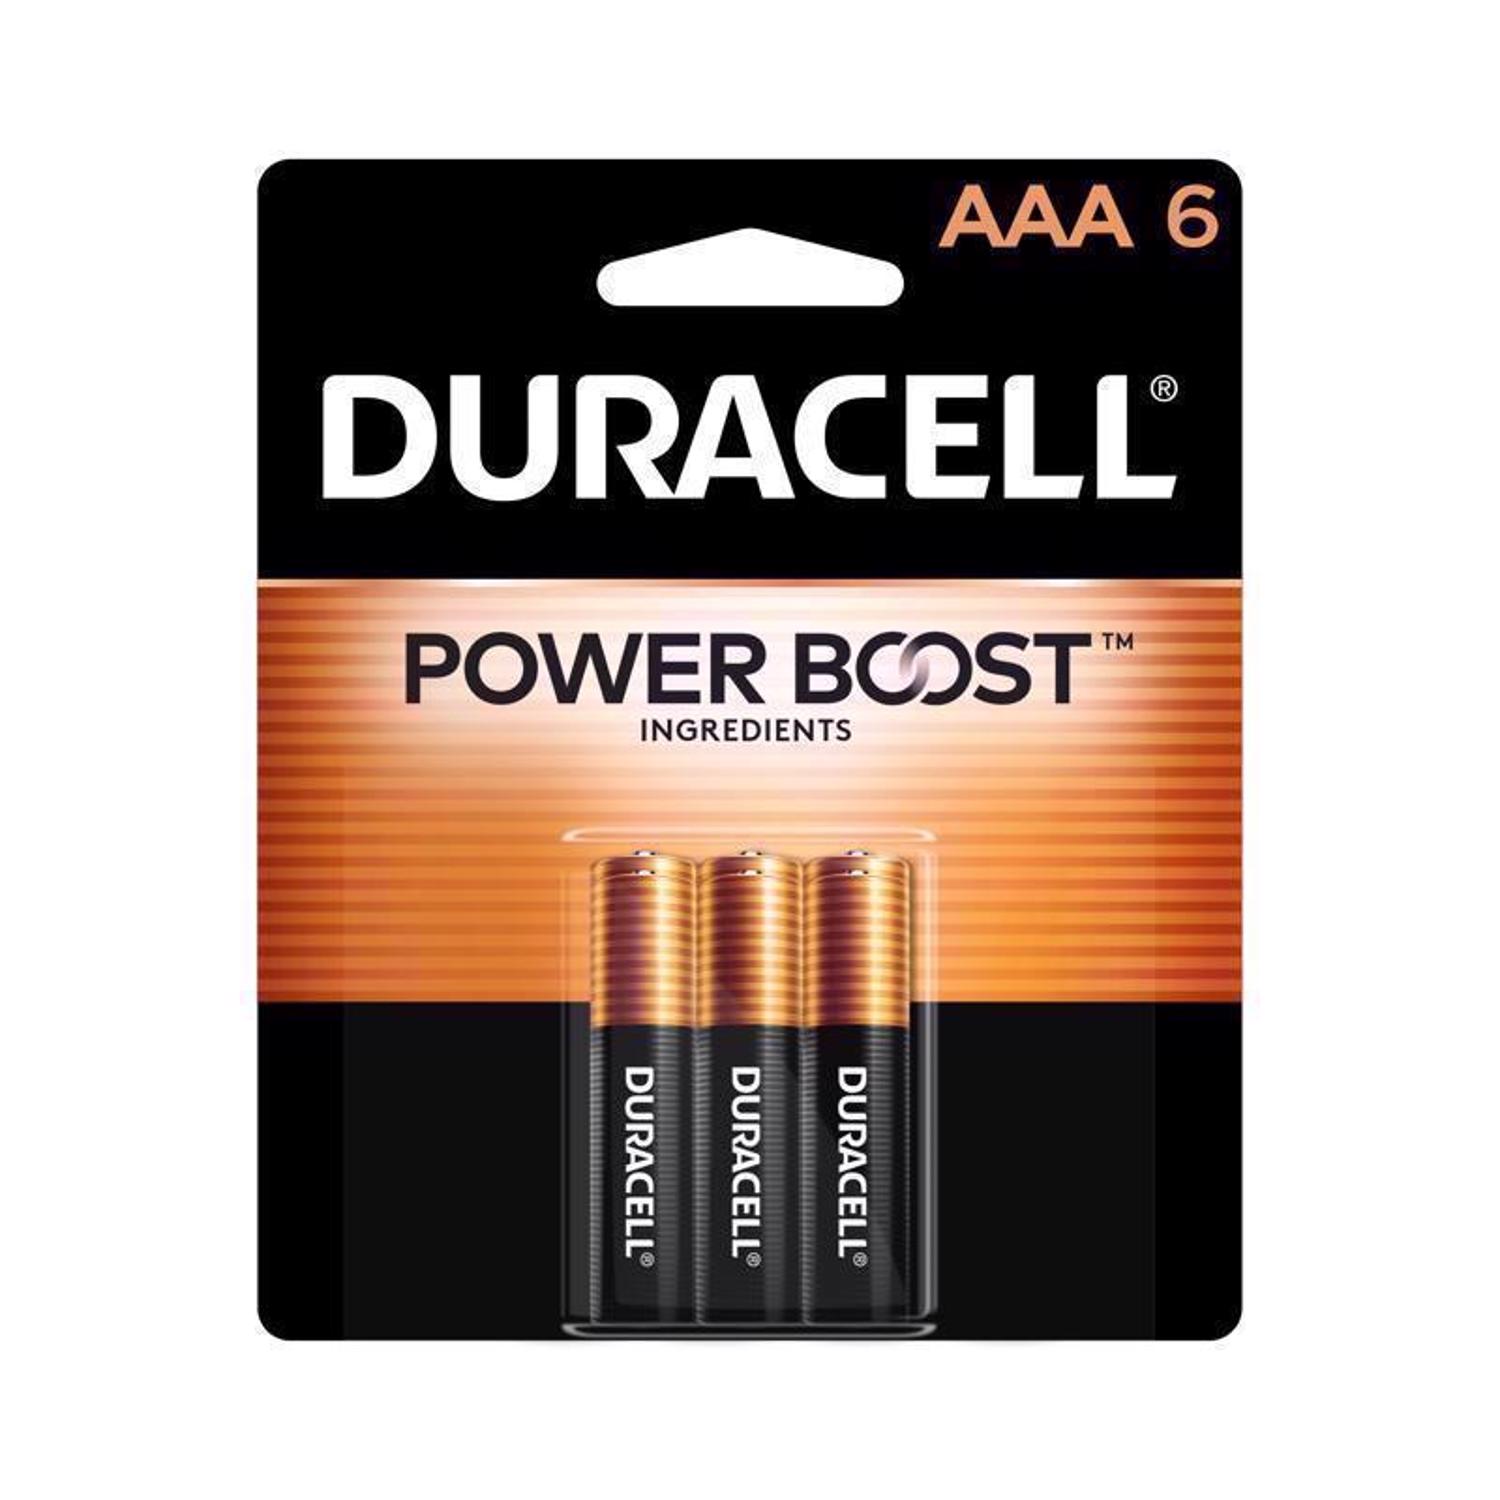 Photos - Household Switch Duracell Coppertop AAA Alkaline Batteries 6 pk Carded MN2400B6 